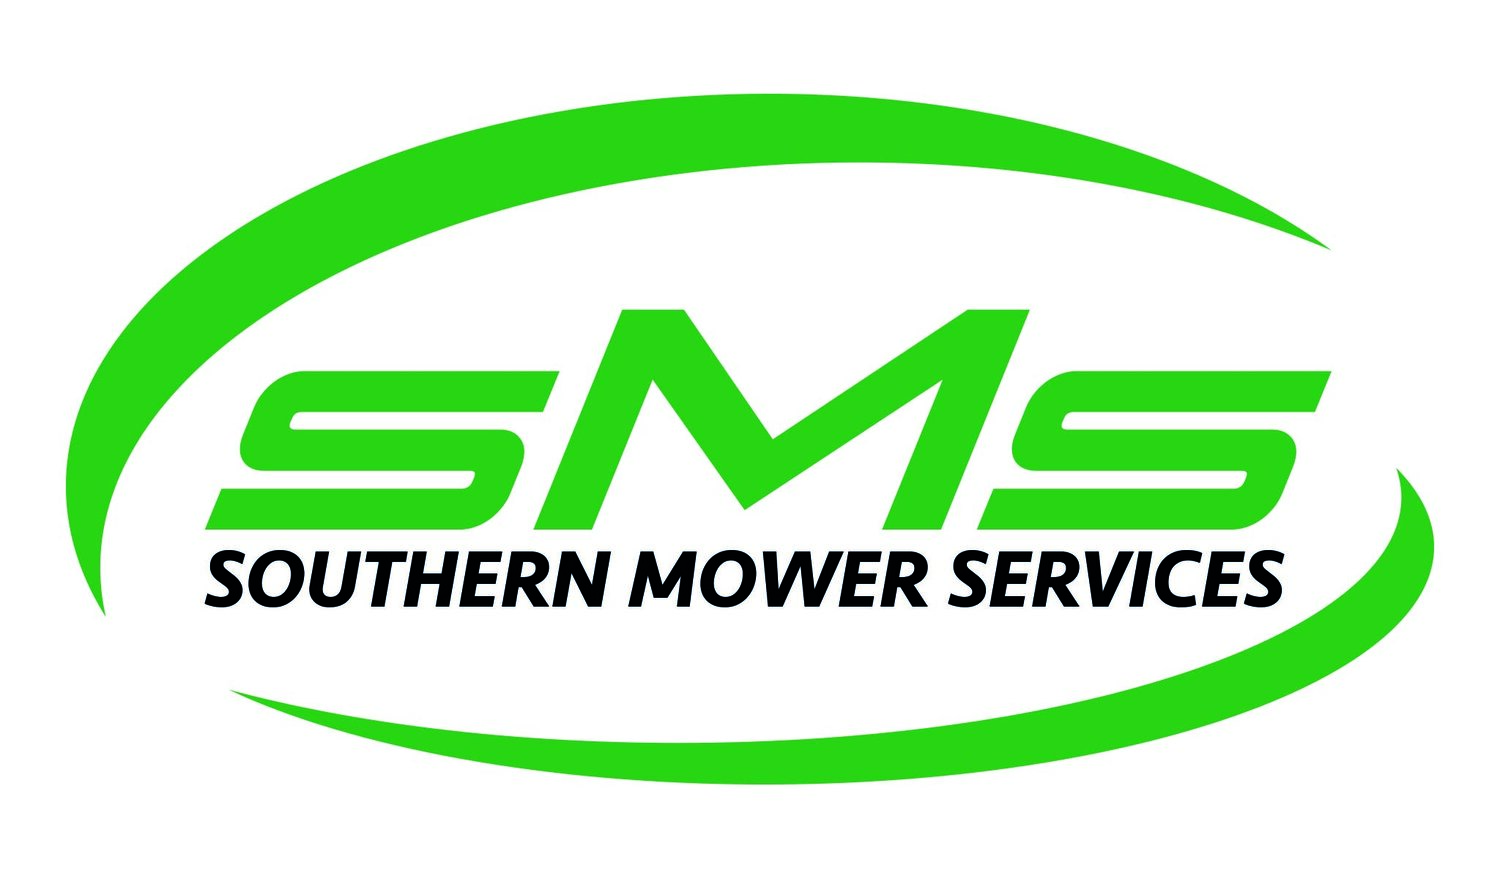 SOUTHERN MOWER SERVICES